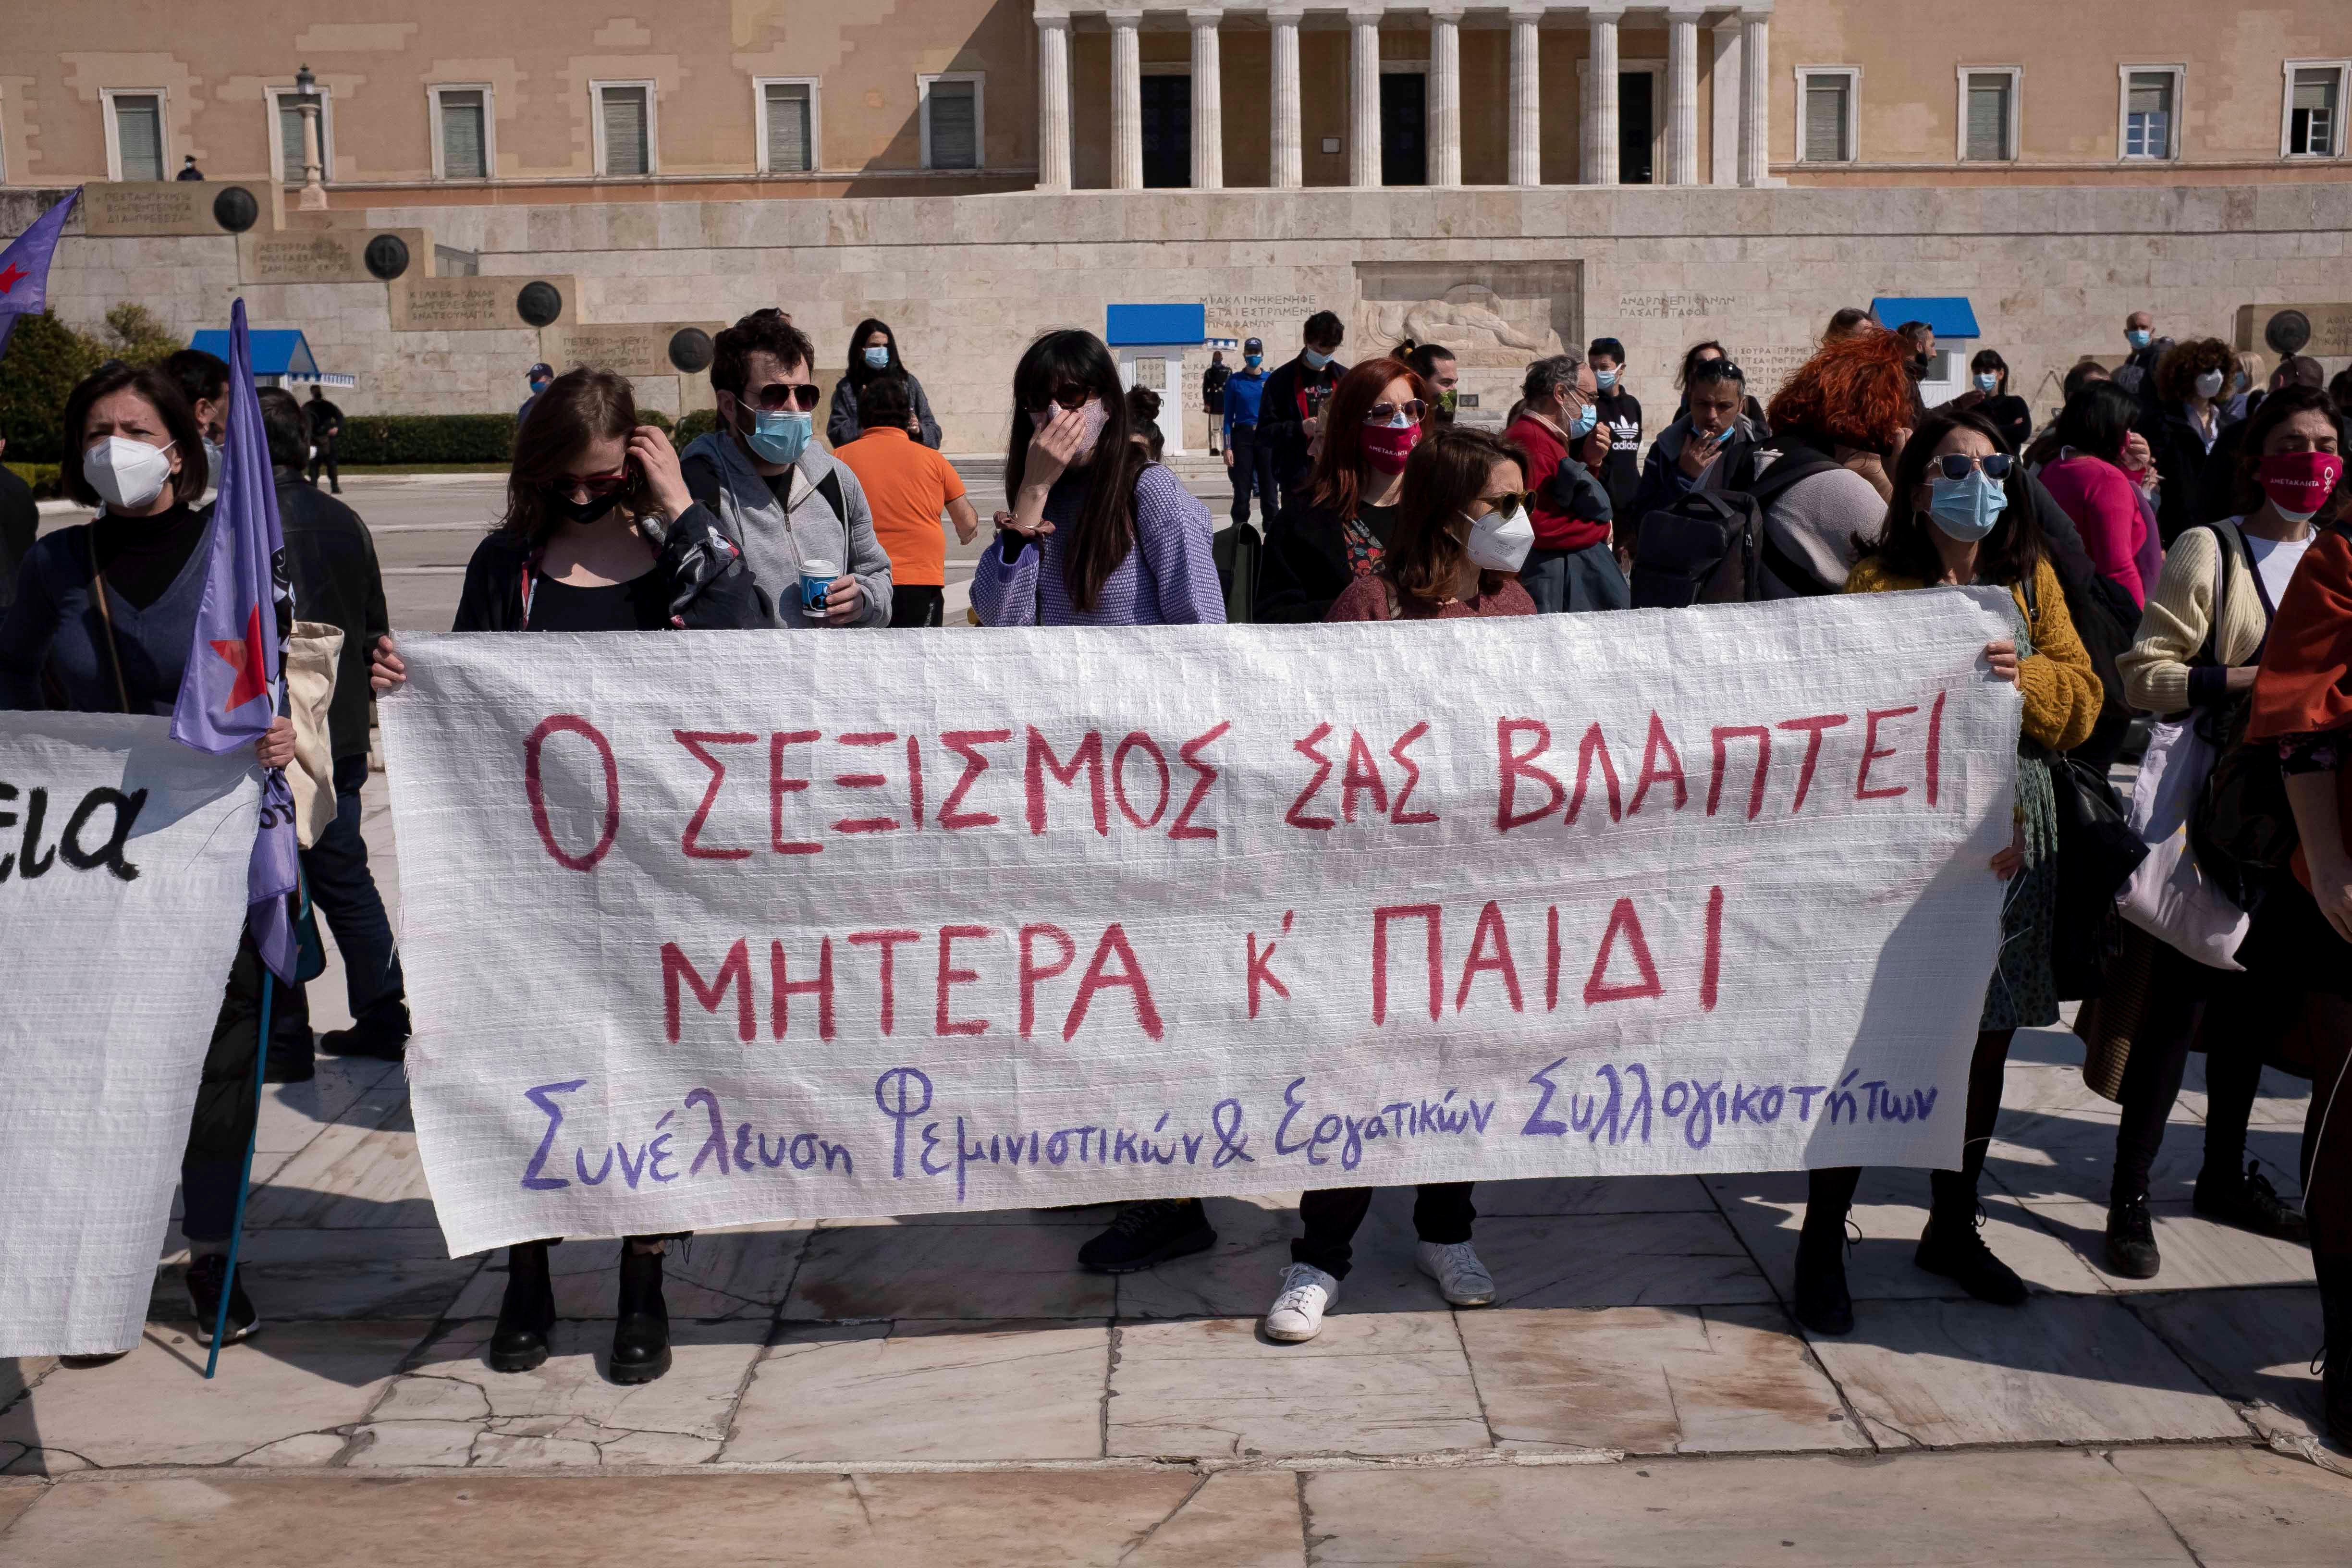 Protesters in Athens, Greece on March 27, 2021 stand outside the Greek Parliament displaying a banner that reads “your sexism is harming both mother and child” against a new law that introduces presumptive co-custody of children, even in cases of domestic violence.